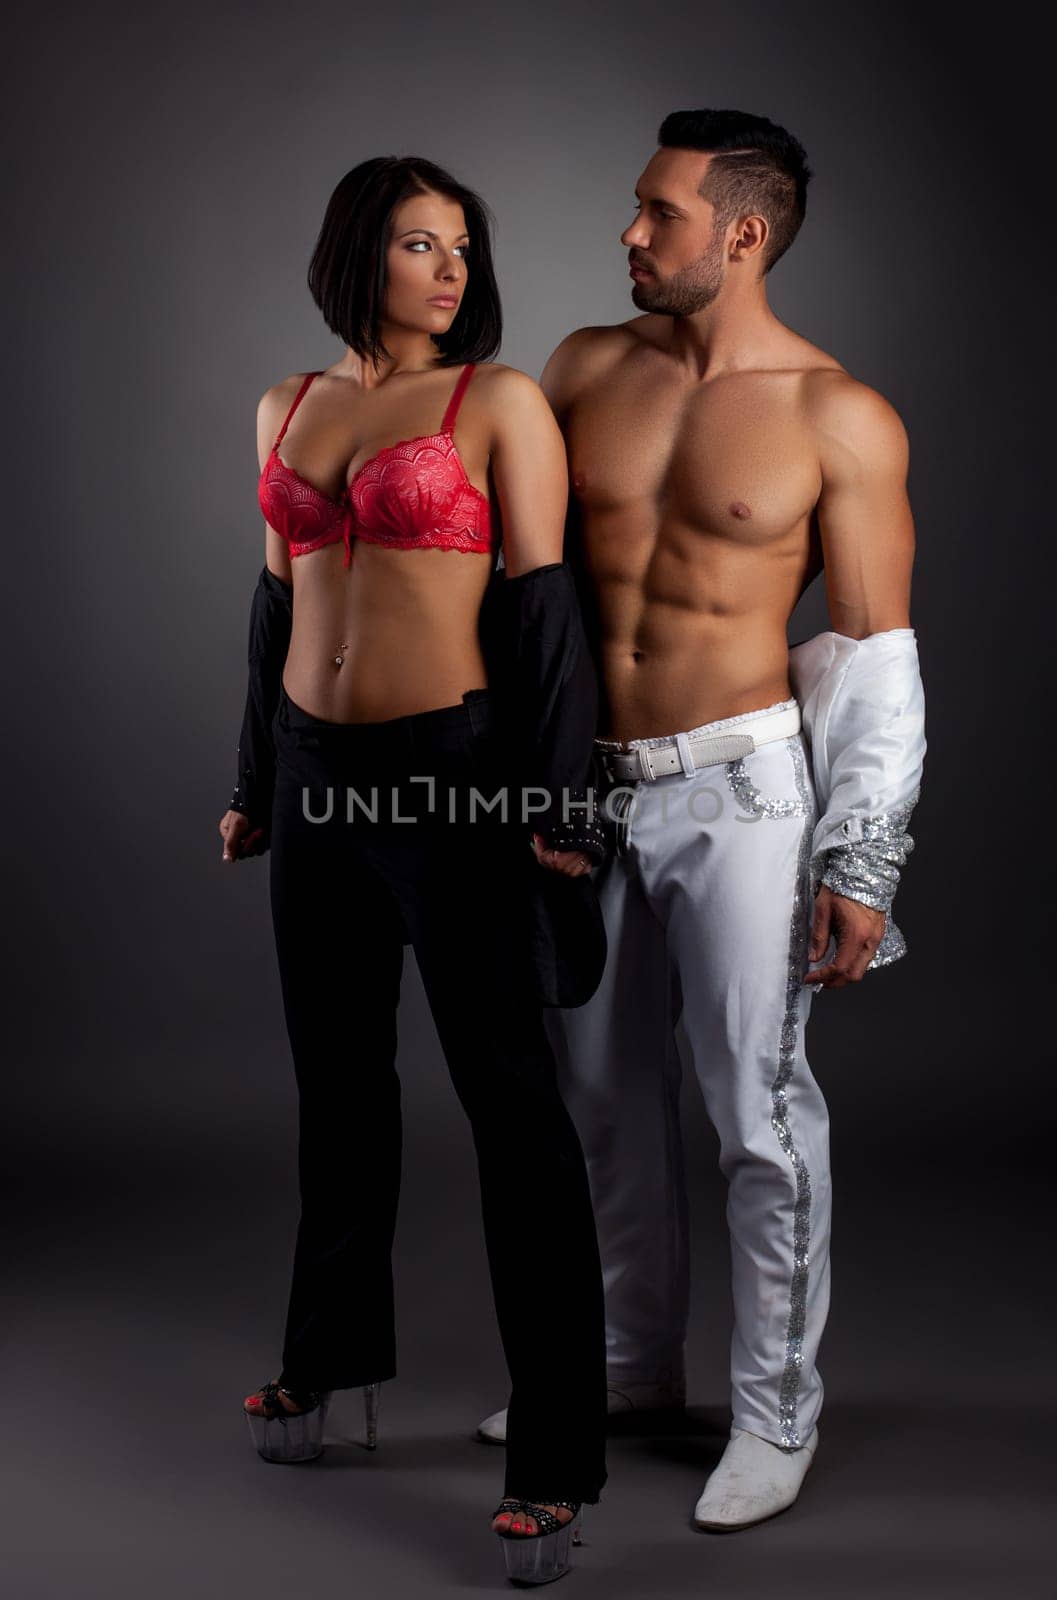 Striptease show. Image of sexy couple posing in studio